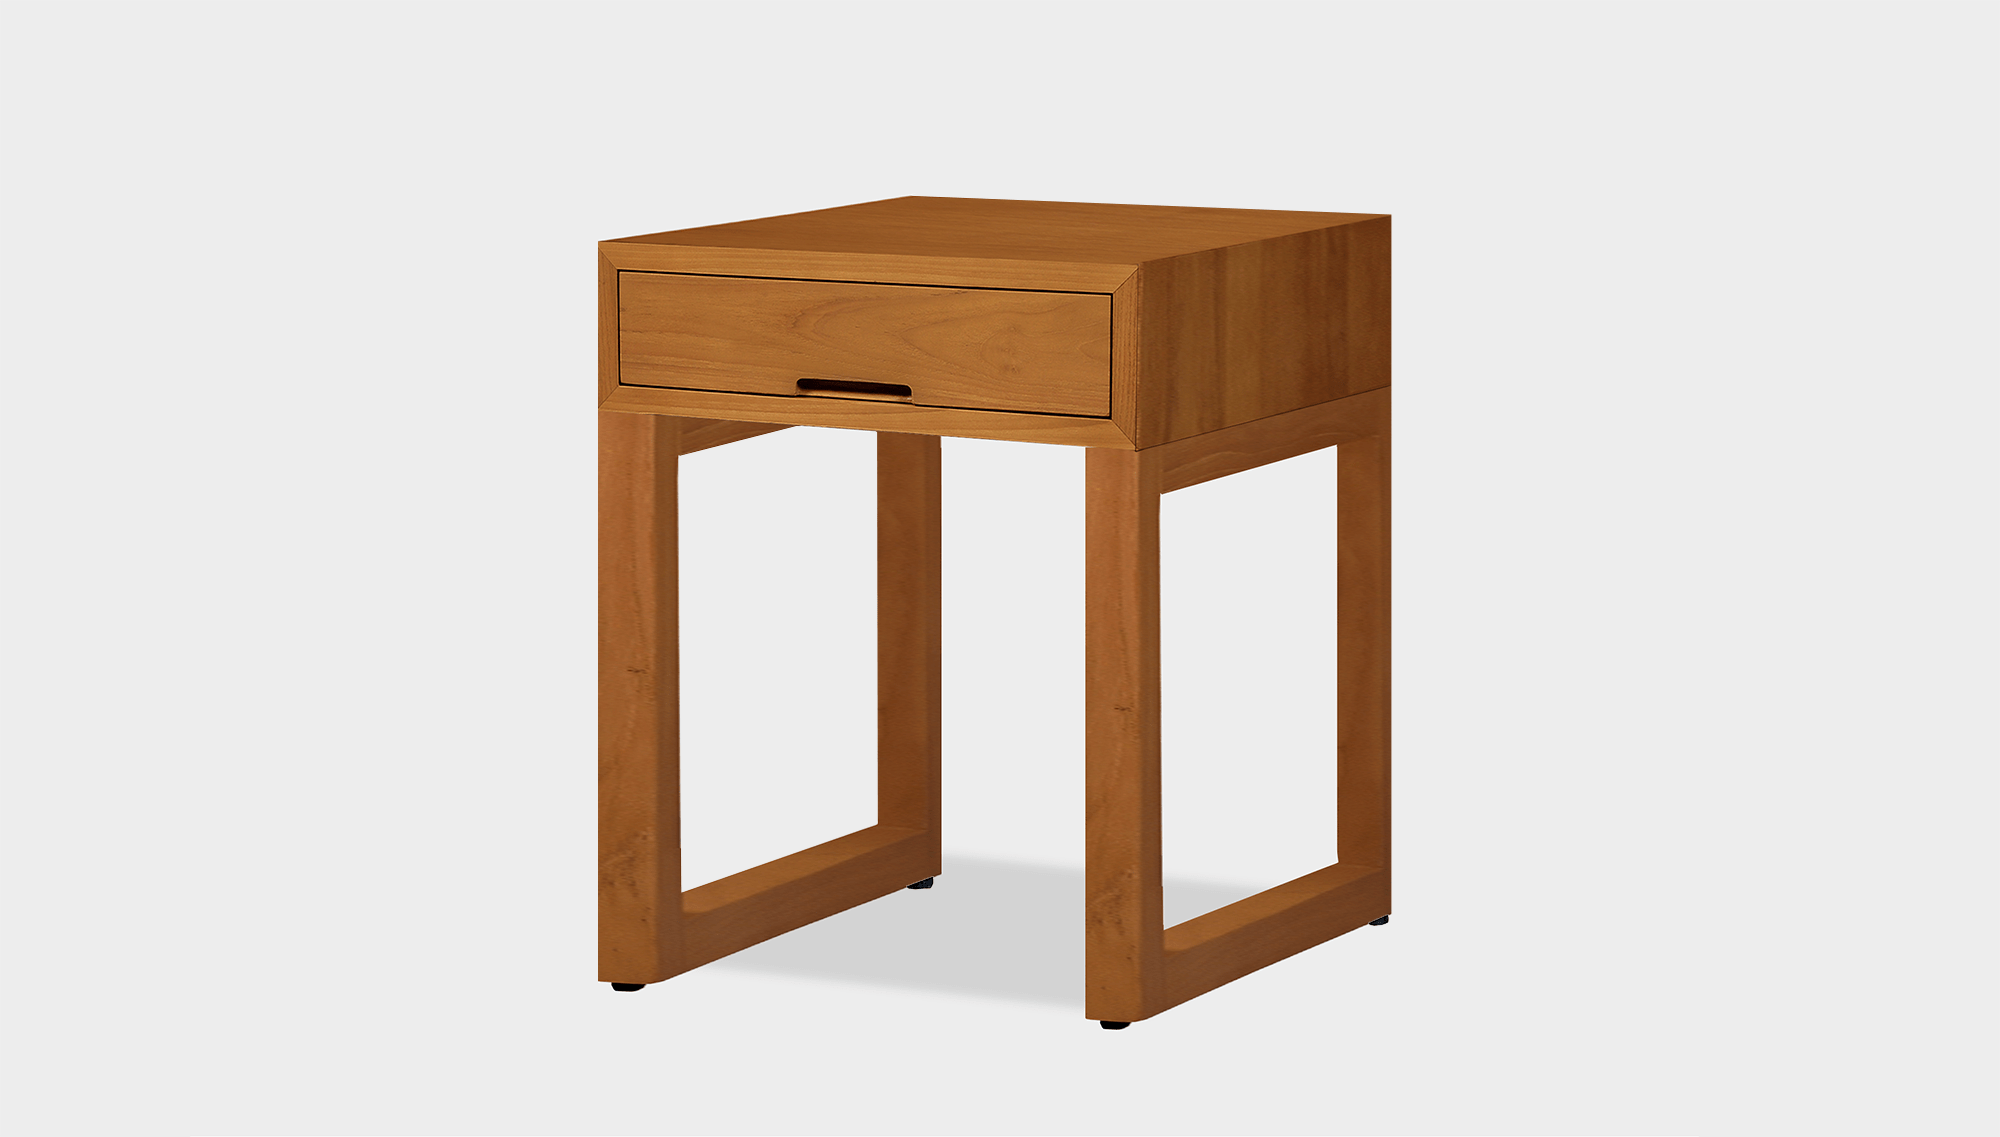 reddie-raw bedside table 45W x 45D x 55H *cm / Wood Teak~Natural / Wood Teak~Natural Suzy Bedside Table High Square